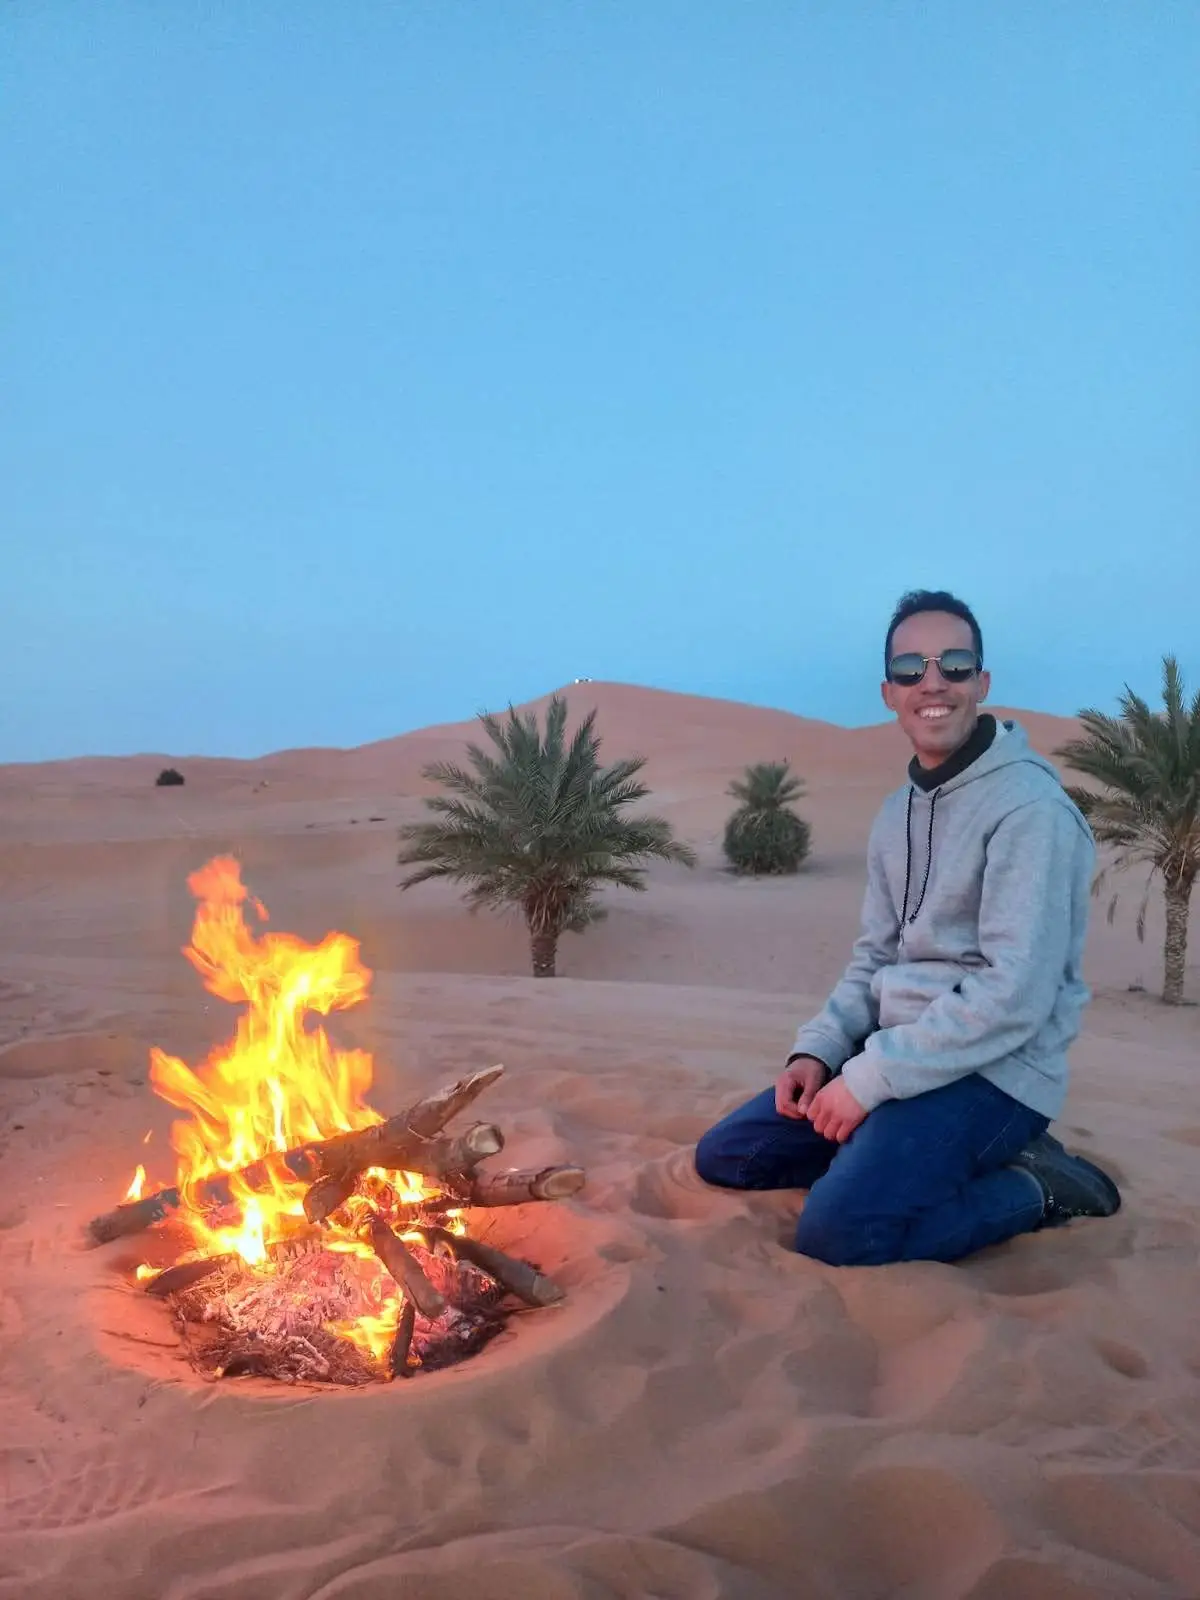 hassan is in sahara